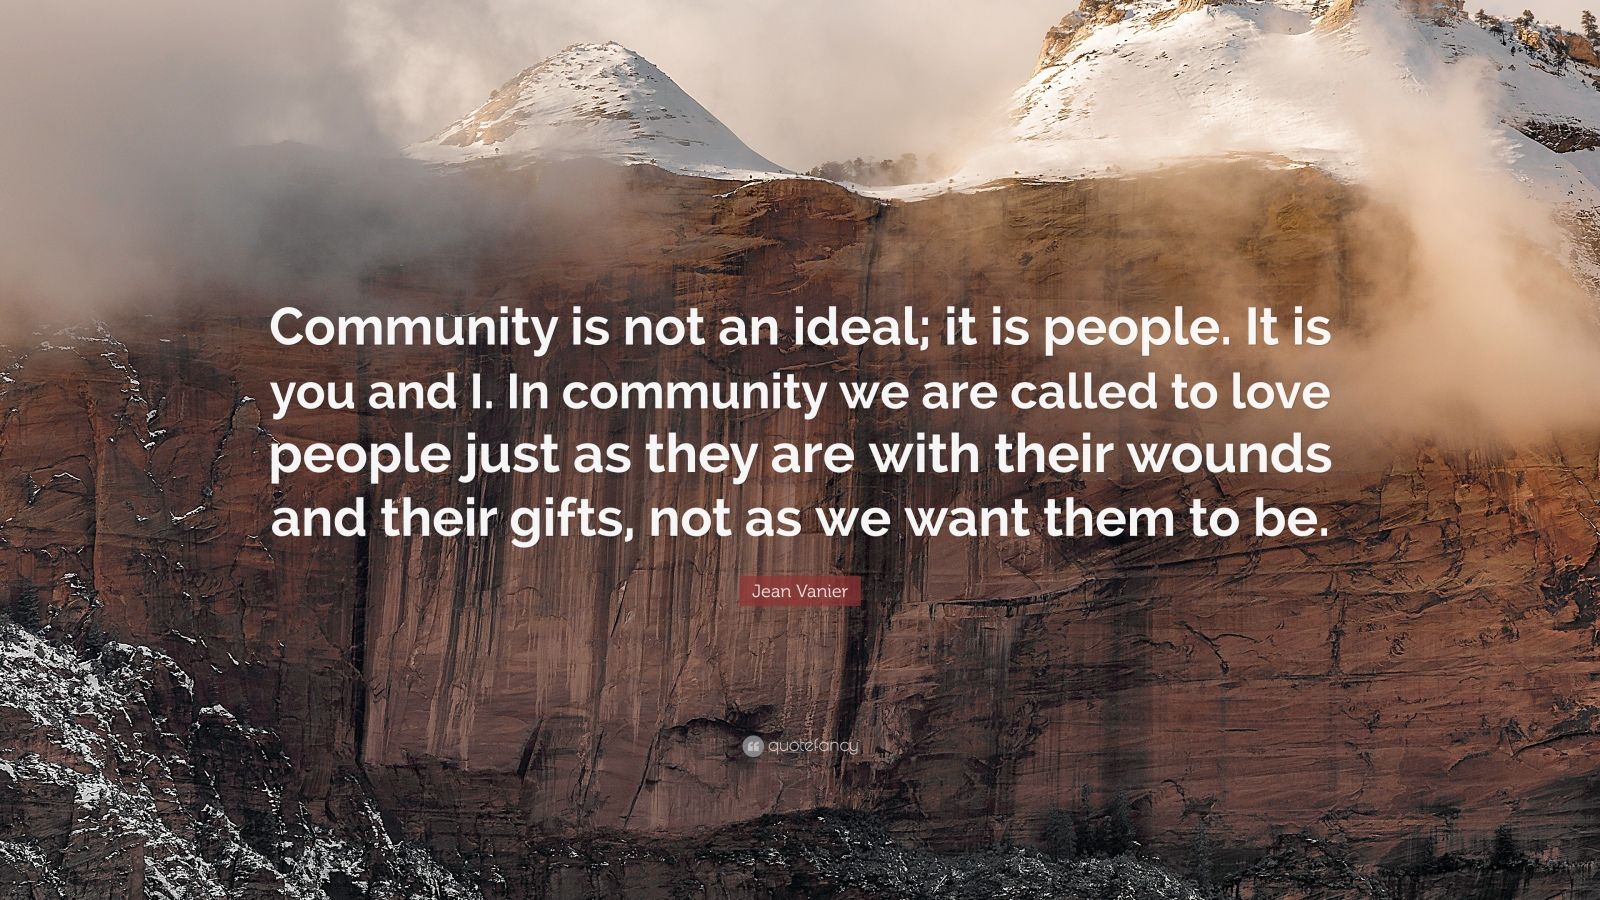 Jean Vanier Quote: “Community is not an ideal; it is people. It is you